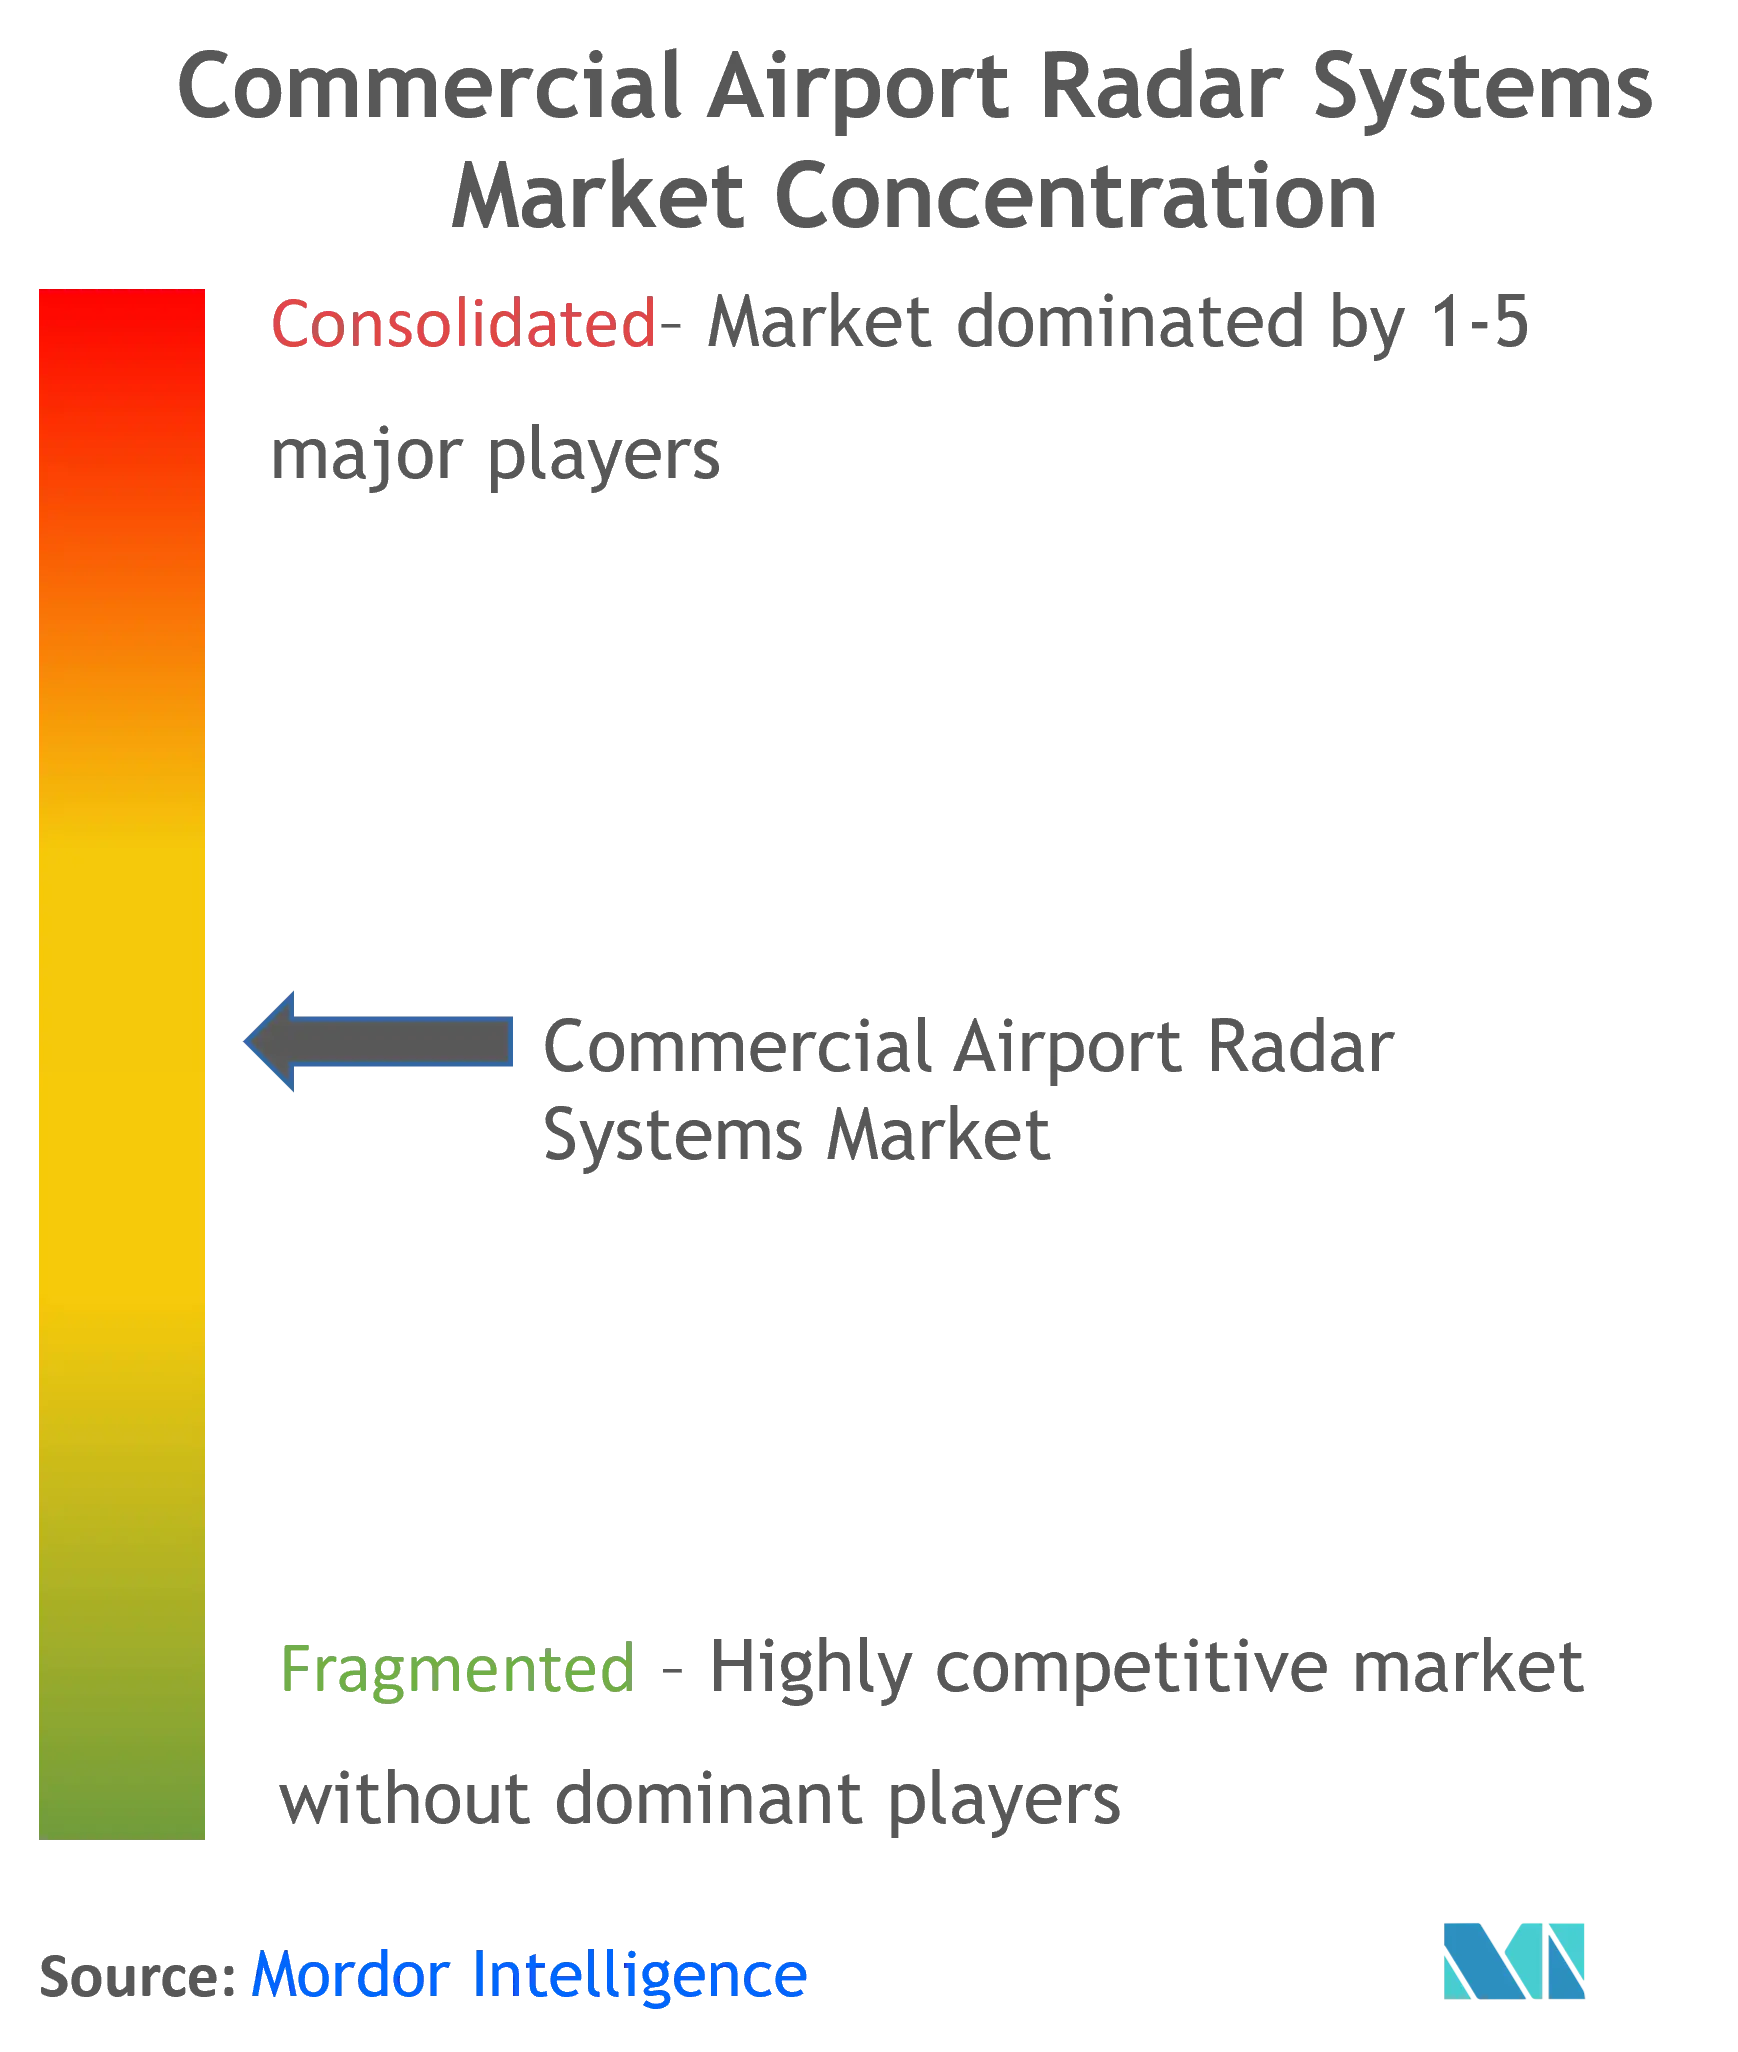 Commercial Airport Radar Systems Market Concentration